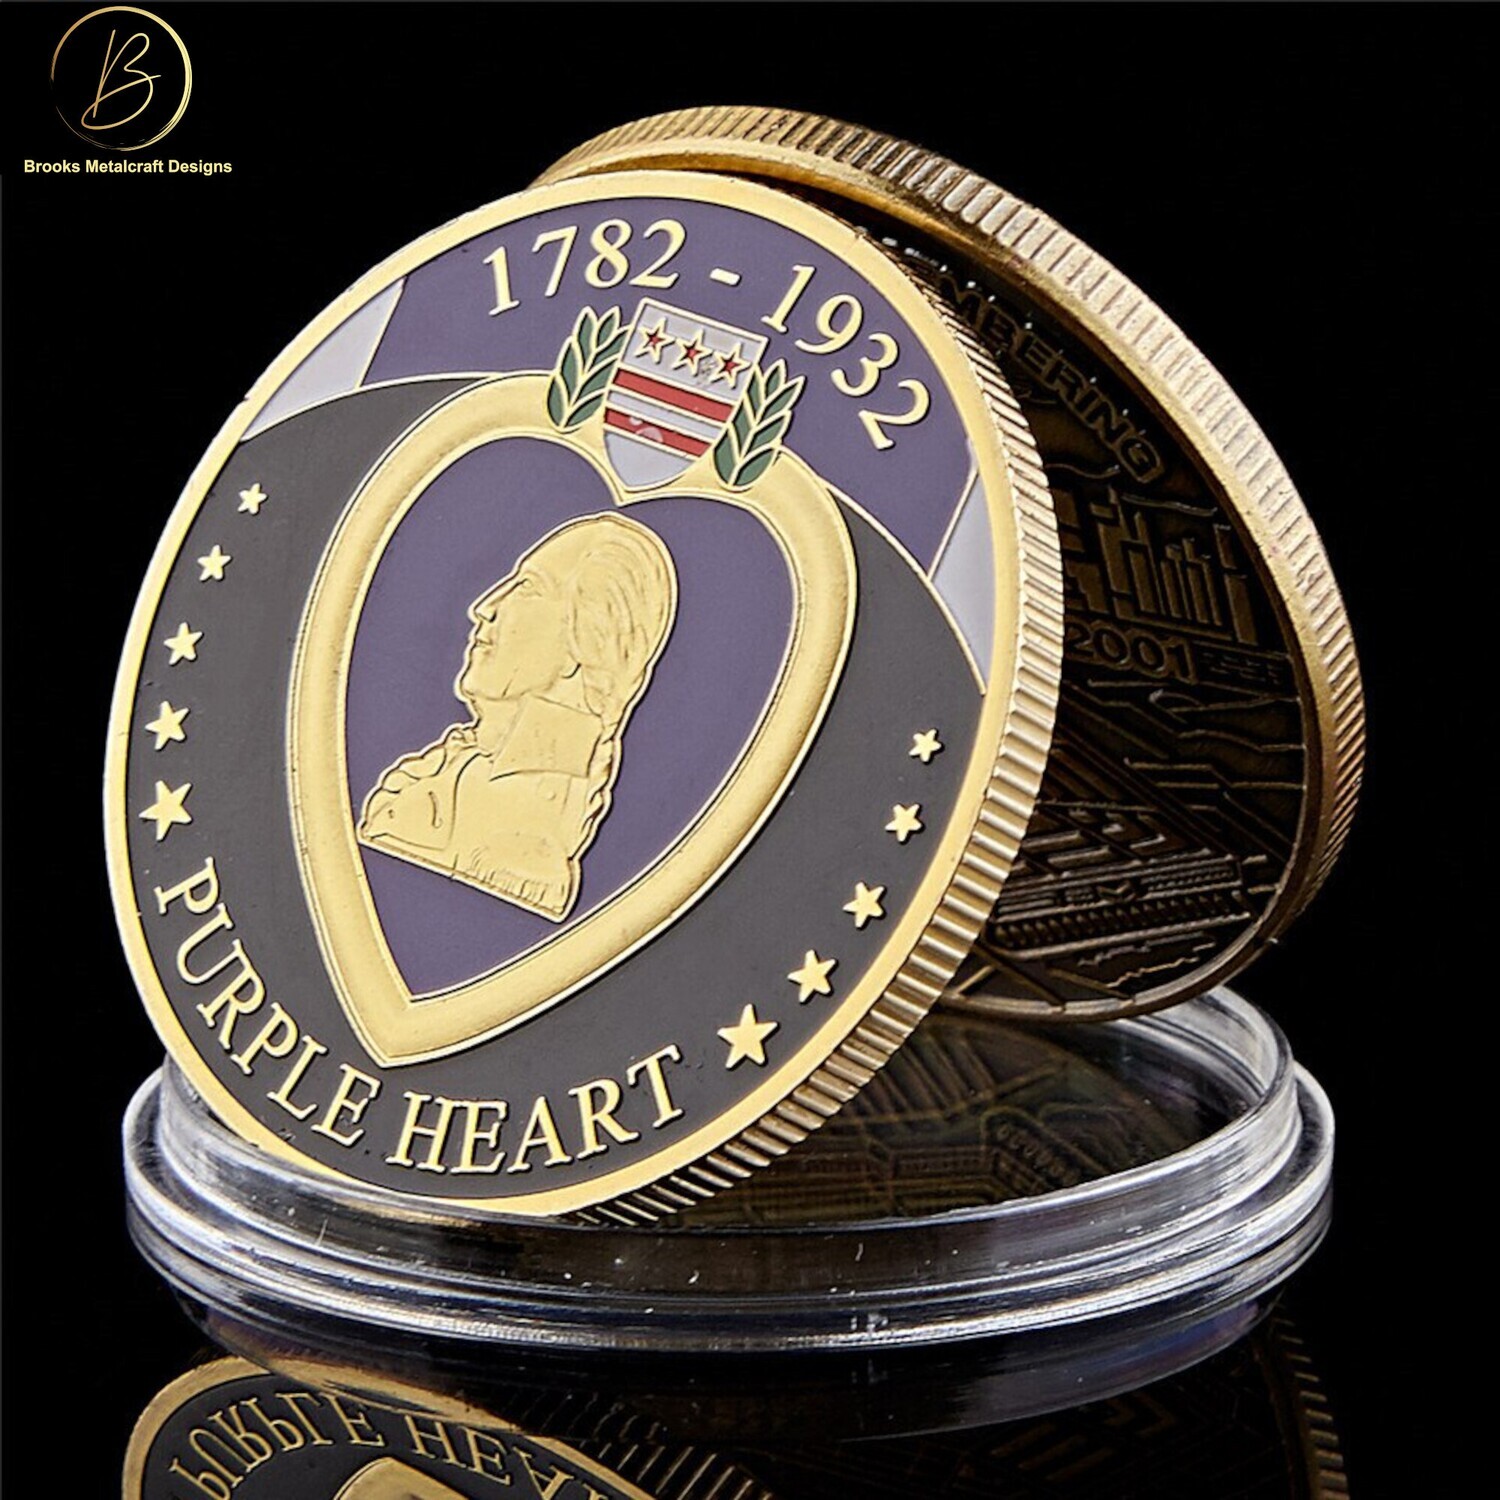 Engraved - 1782-1932 Purple Heart Challenge Coin